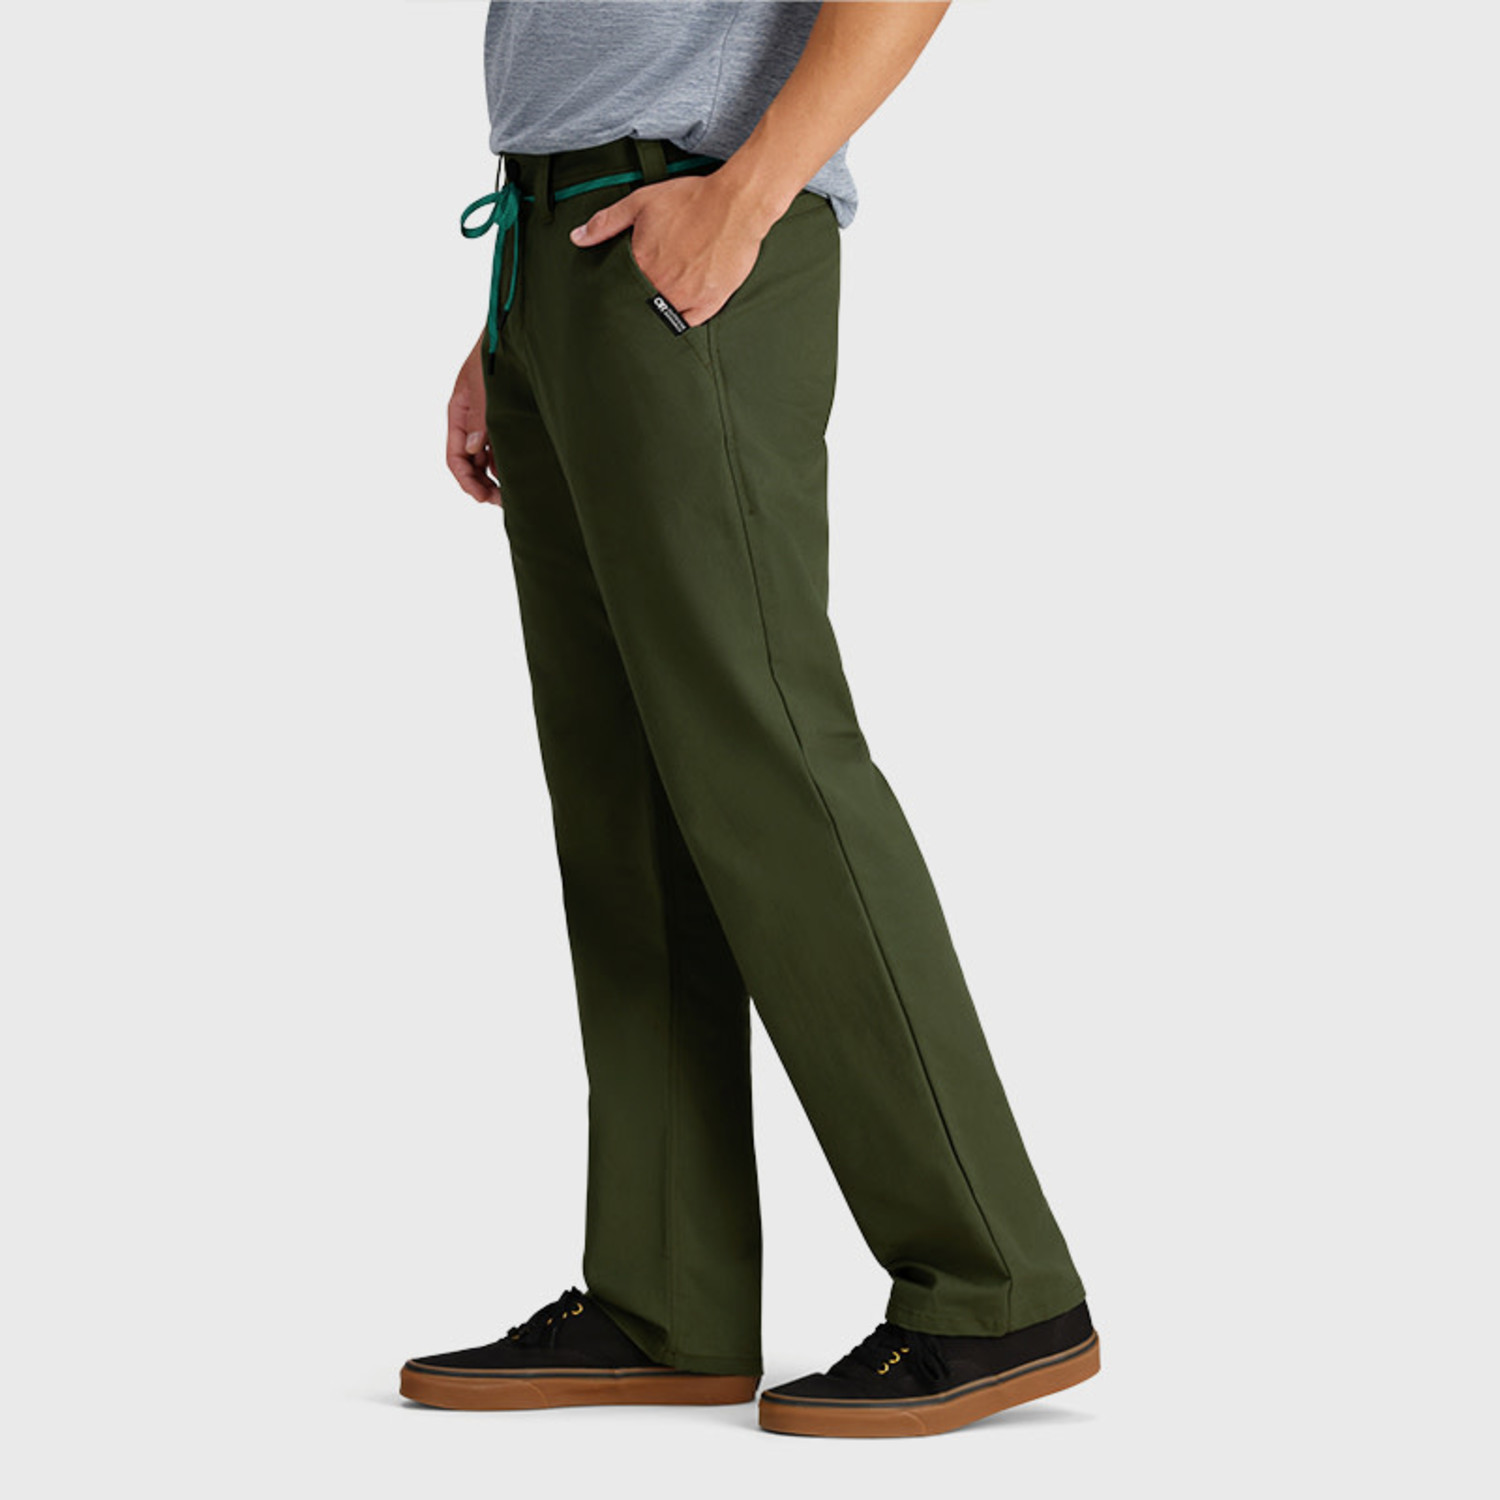 RangeWear by Scully Men's Canvas Frontier Pant- 7 Colors